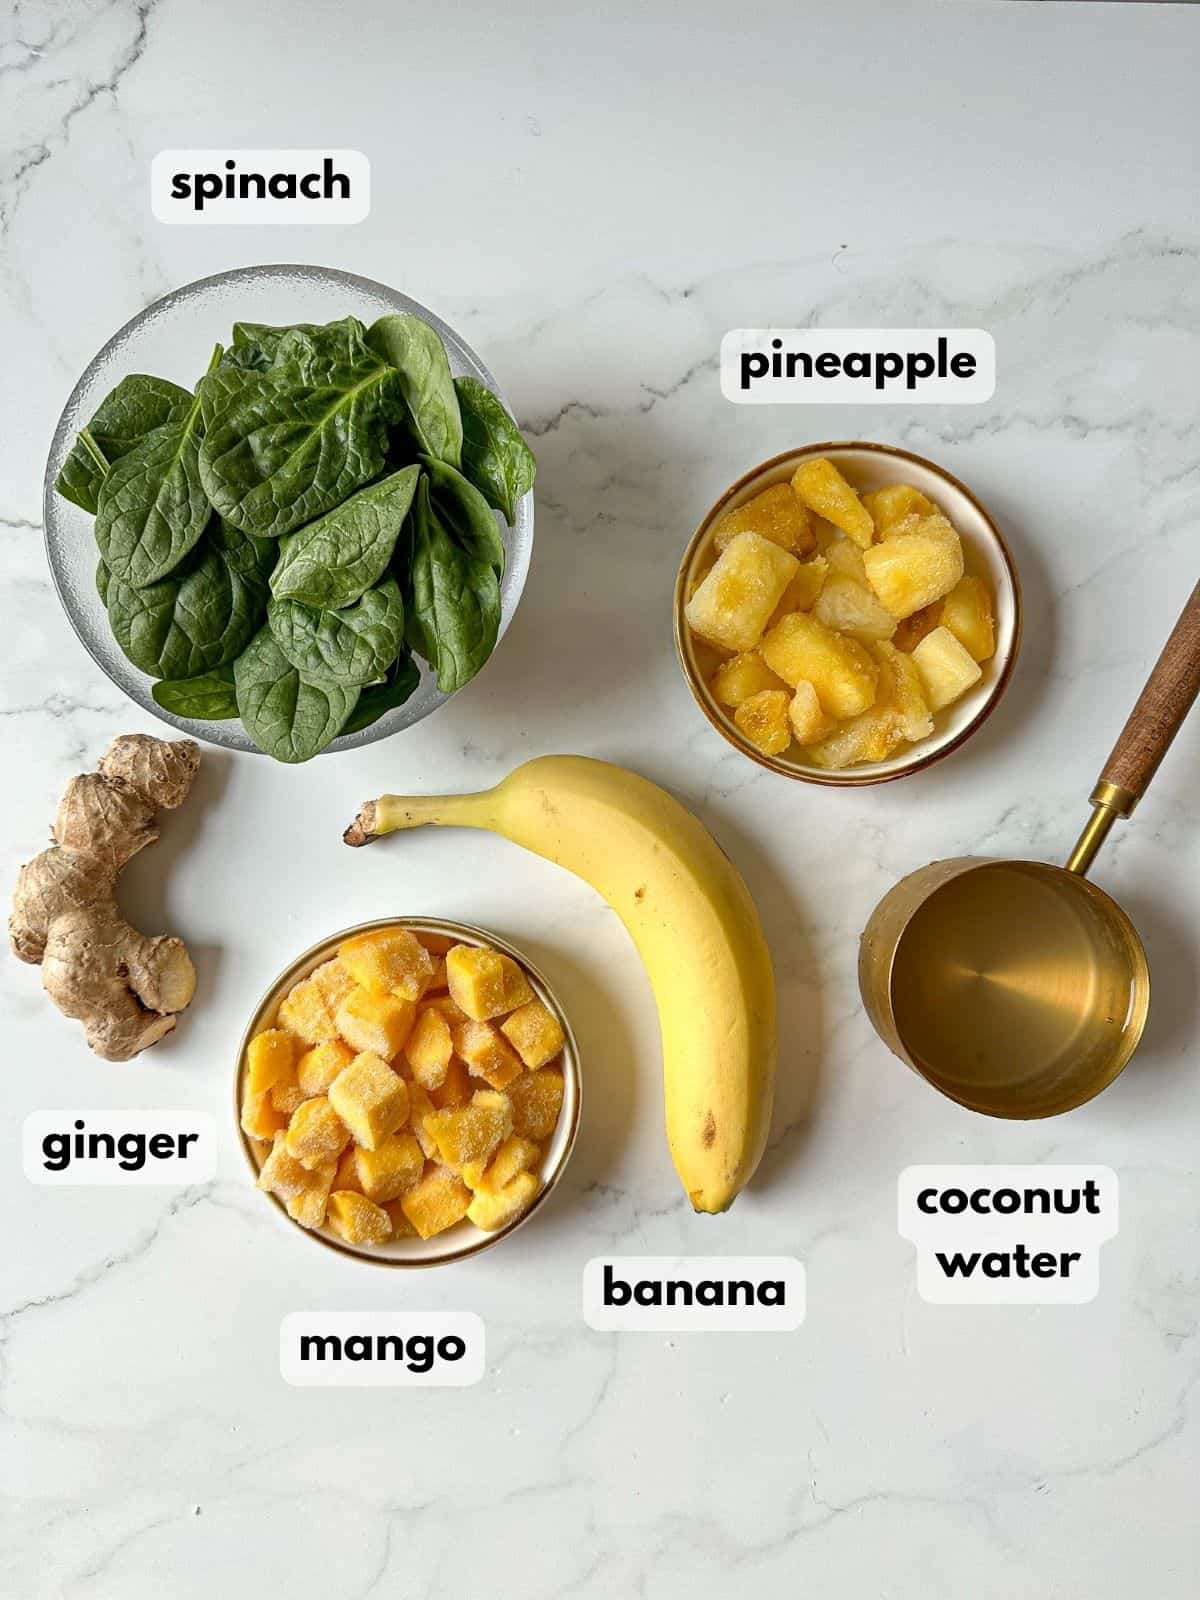 Ingredients need to make a detox island green smoothie are on a marble countertop.